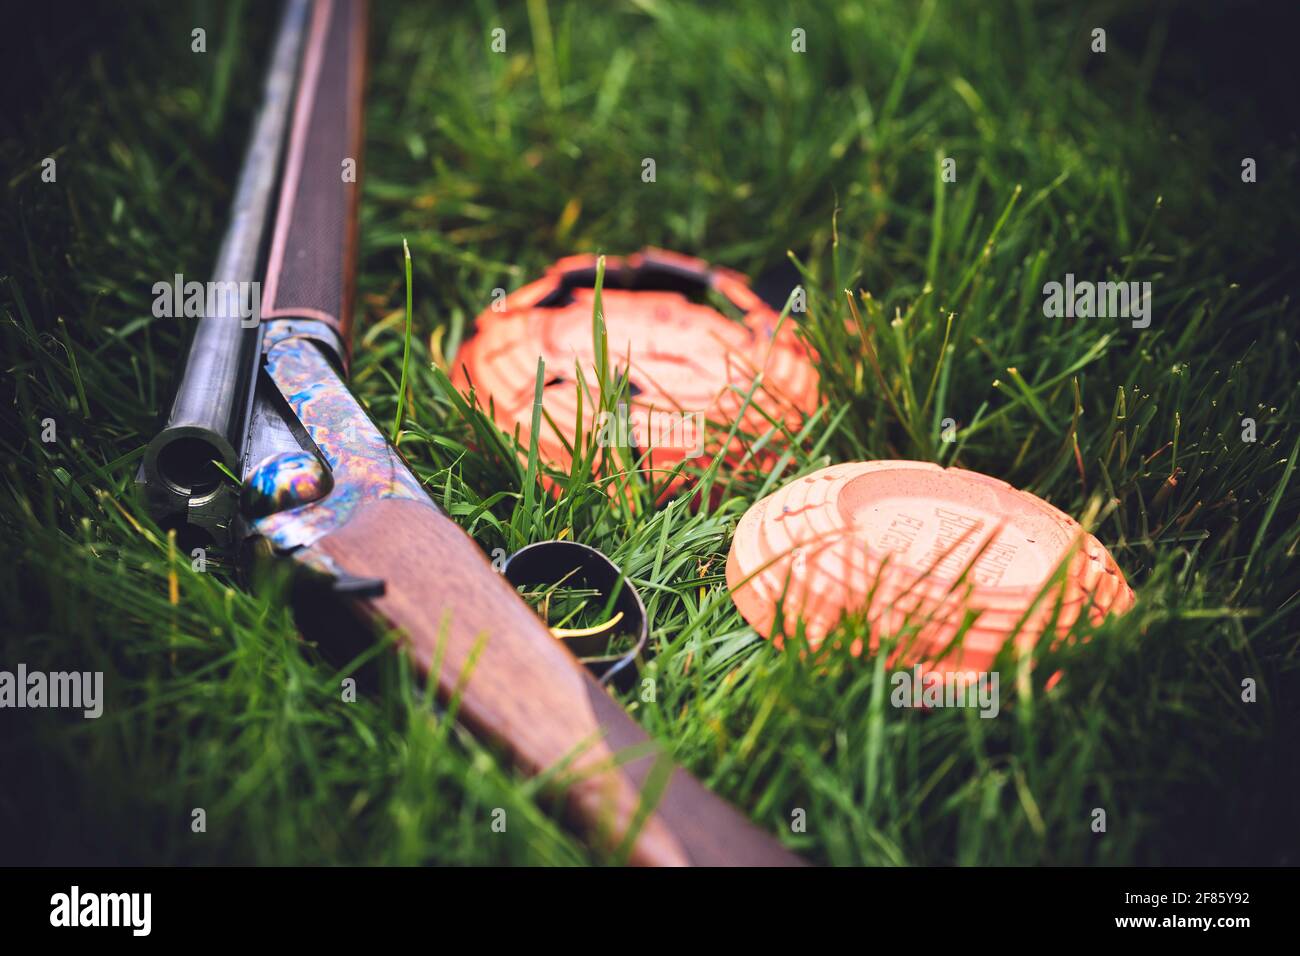 A case hardened Tristar Bristol 28ga side by side shotgun rests in the grass next to a pair of orange clay targets.  One of the clay targets is broken Stock Photo